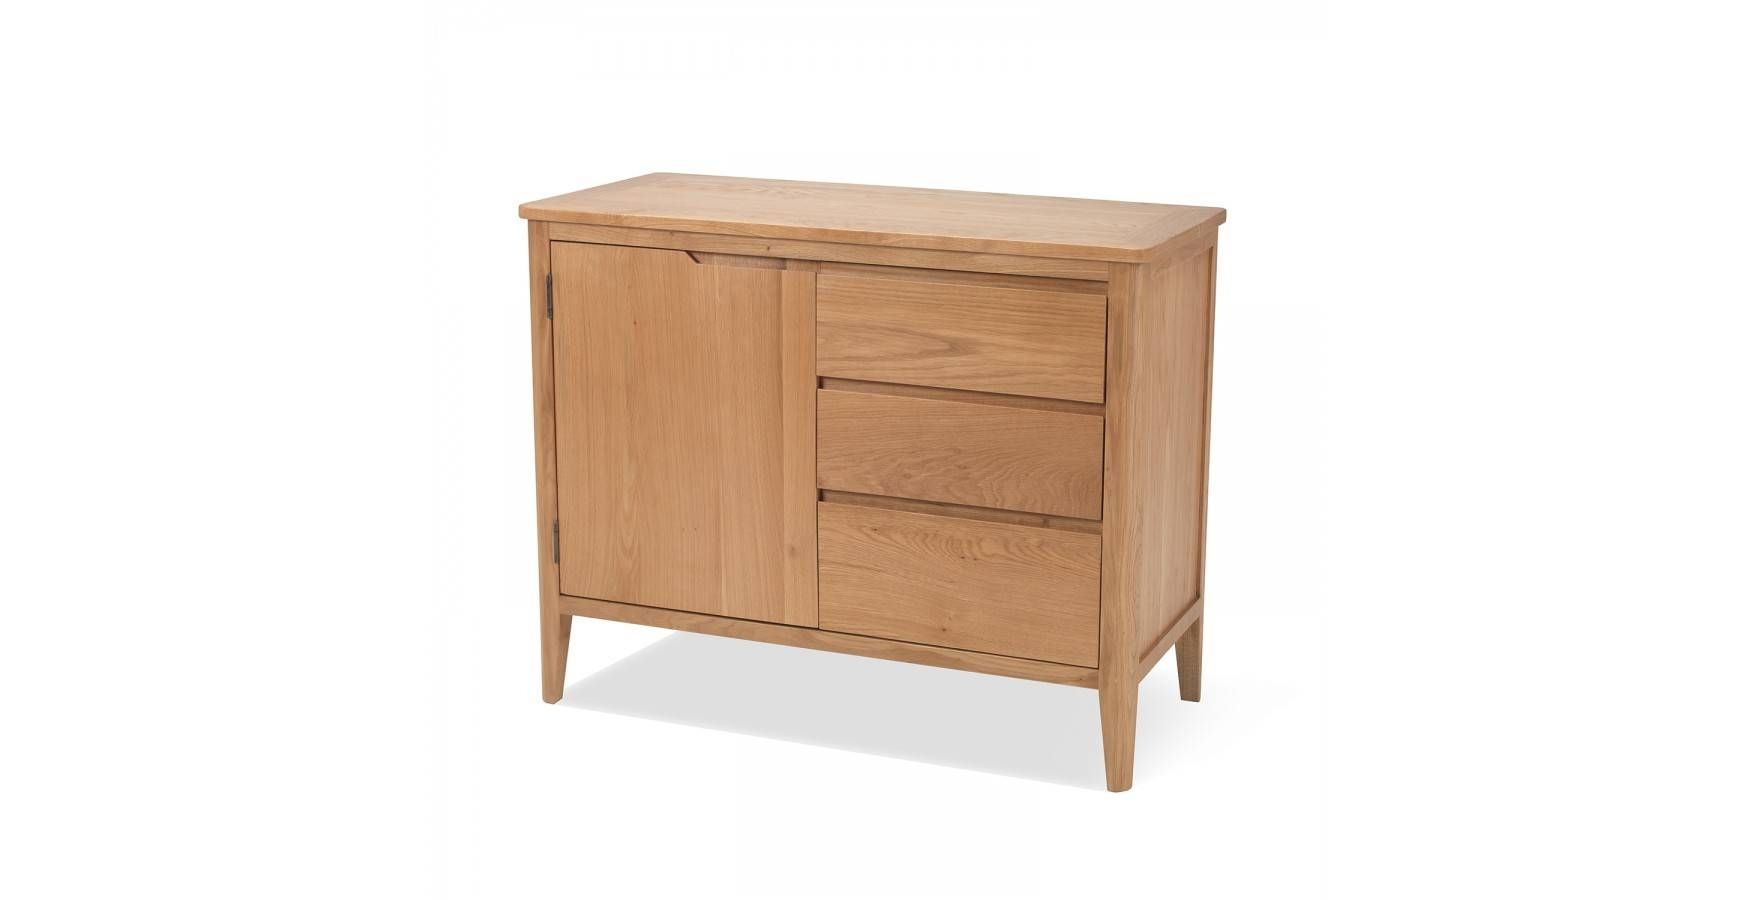 Cadley Oak Small Sideboard With Drawers – Lifestyle Furniture Uk For Small Sideboards With Drawers (View 2 of 30)